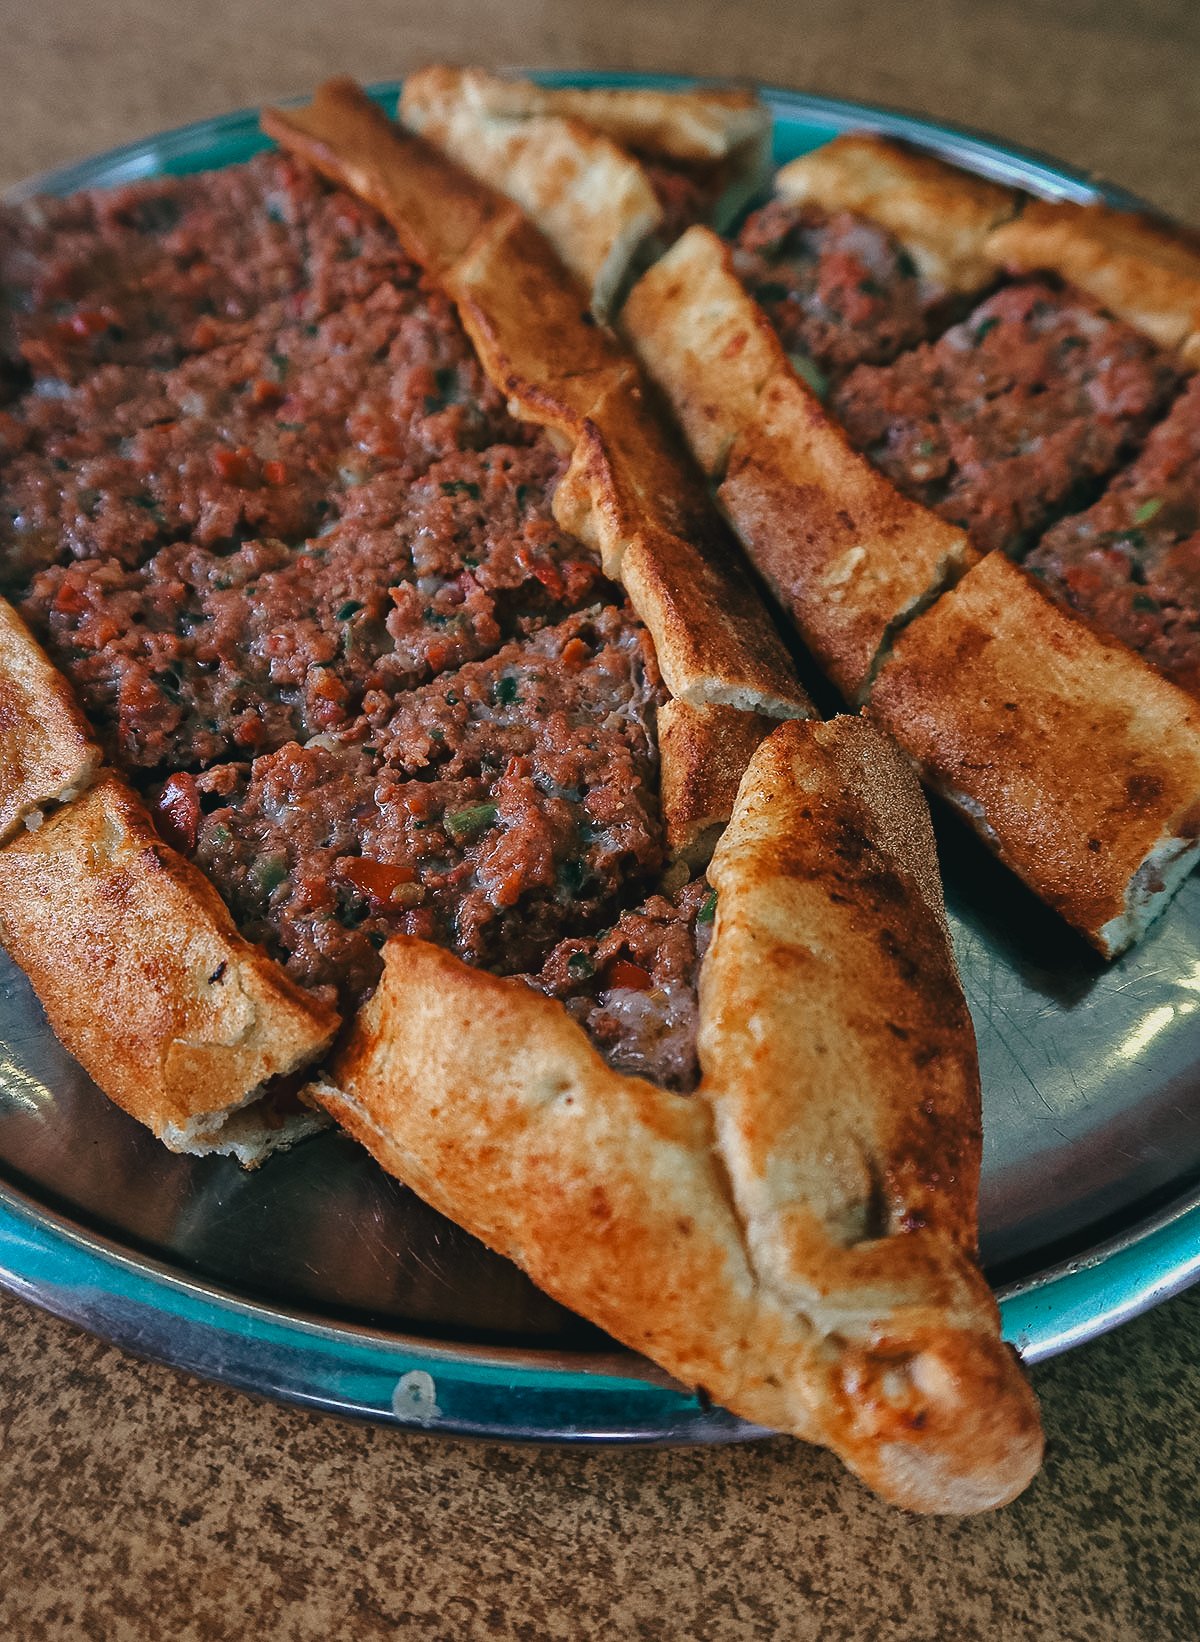 Pide at a restaurant in Istanbul